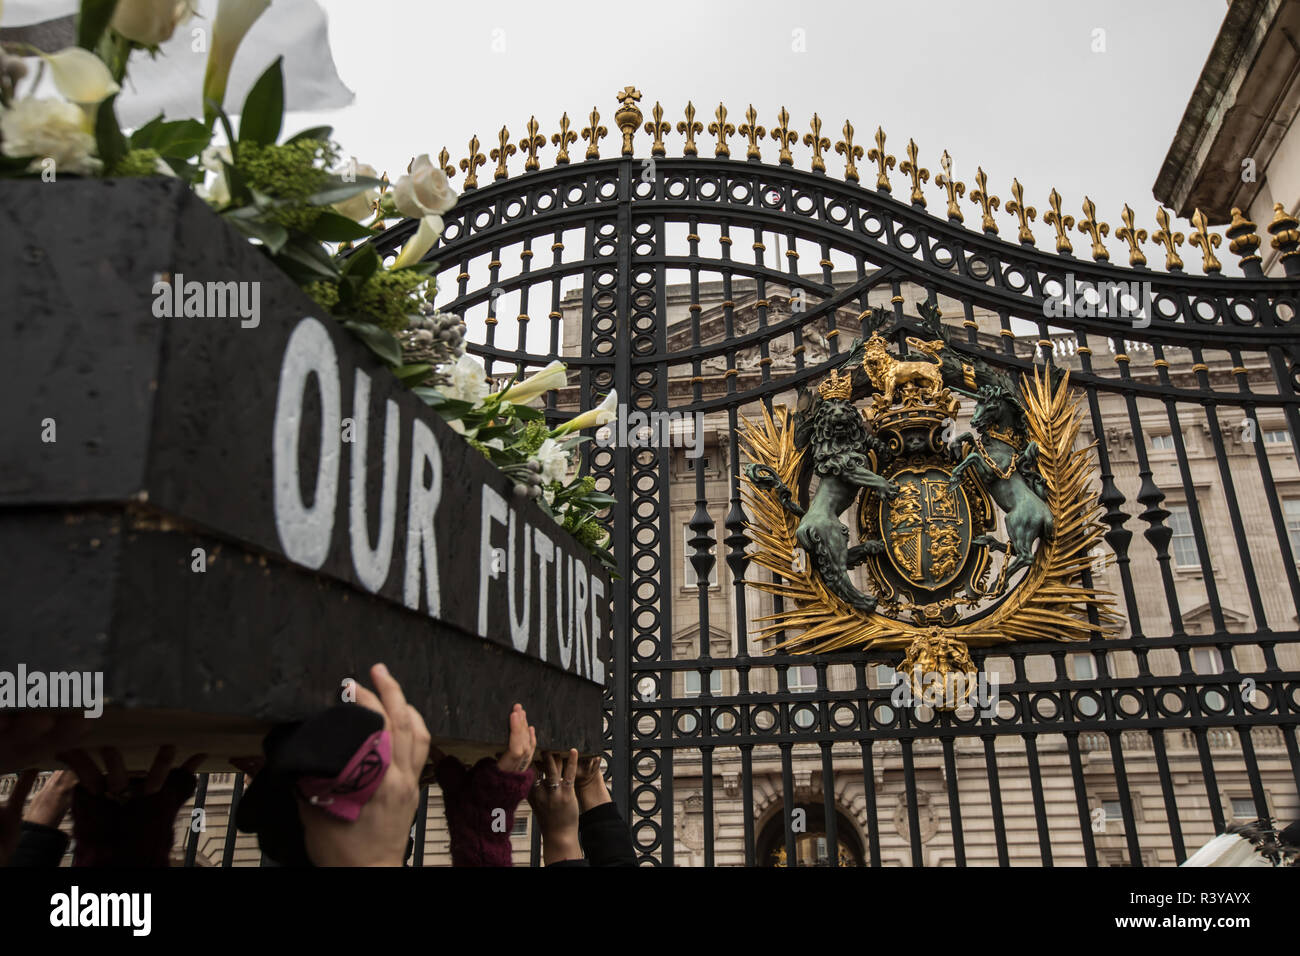 24 November, 2018. London,UK. 'Extinction Rebellion' climate protesters demonstrated in central London with a funeral procession which included a sit down outside Downing Street and a march to Buckingham Palace. David Rowe/ Alamy Live News. Stock Photo